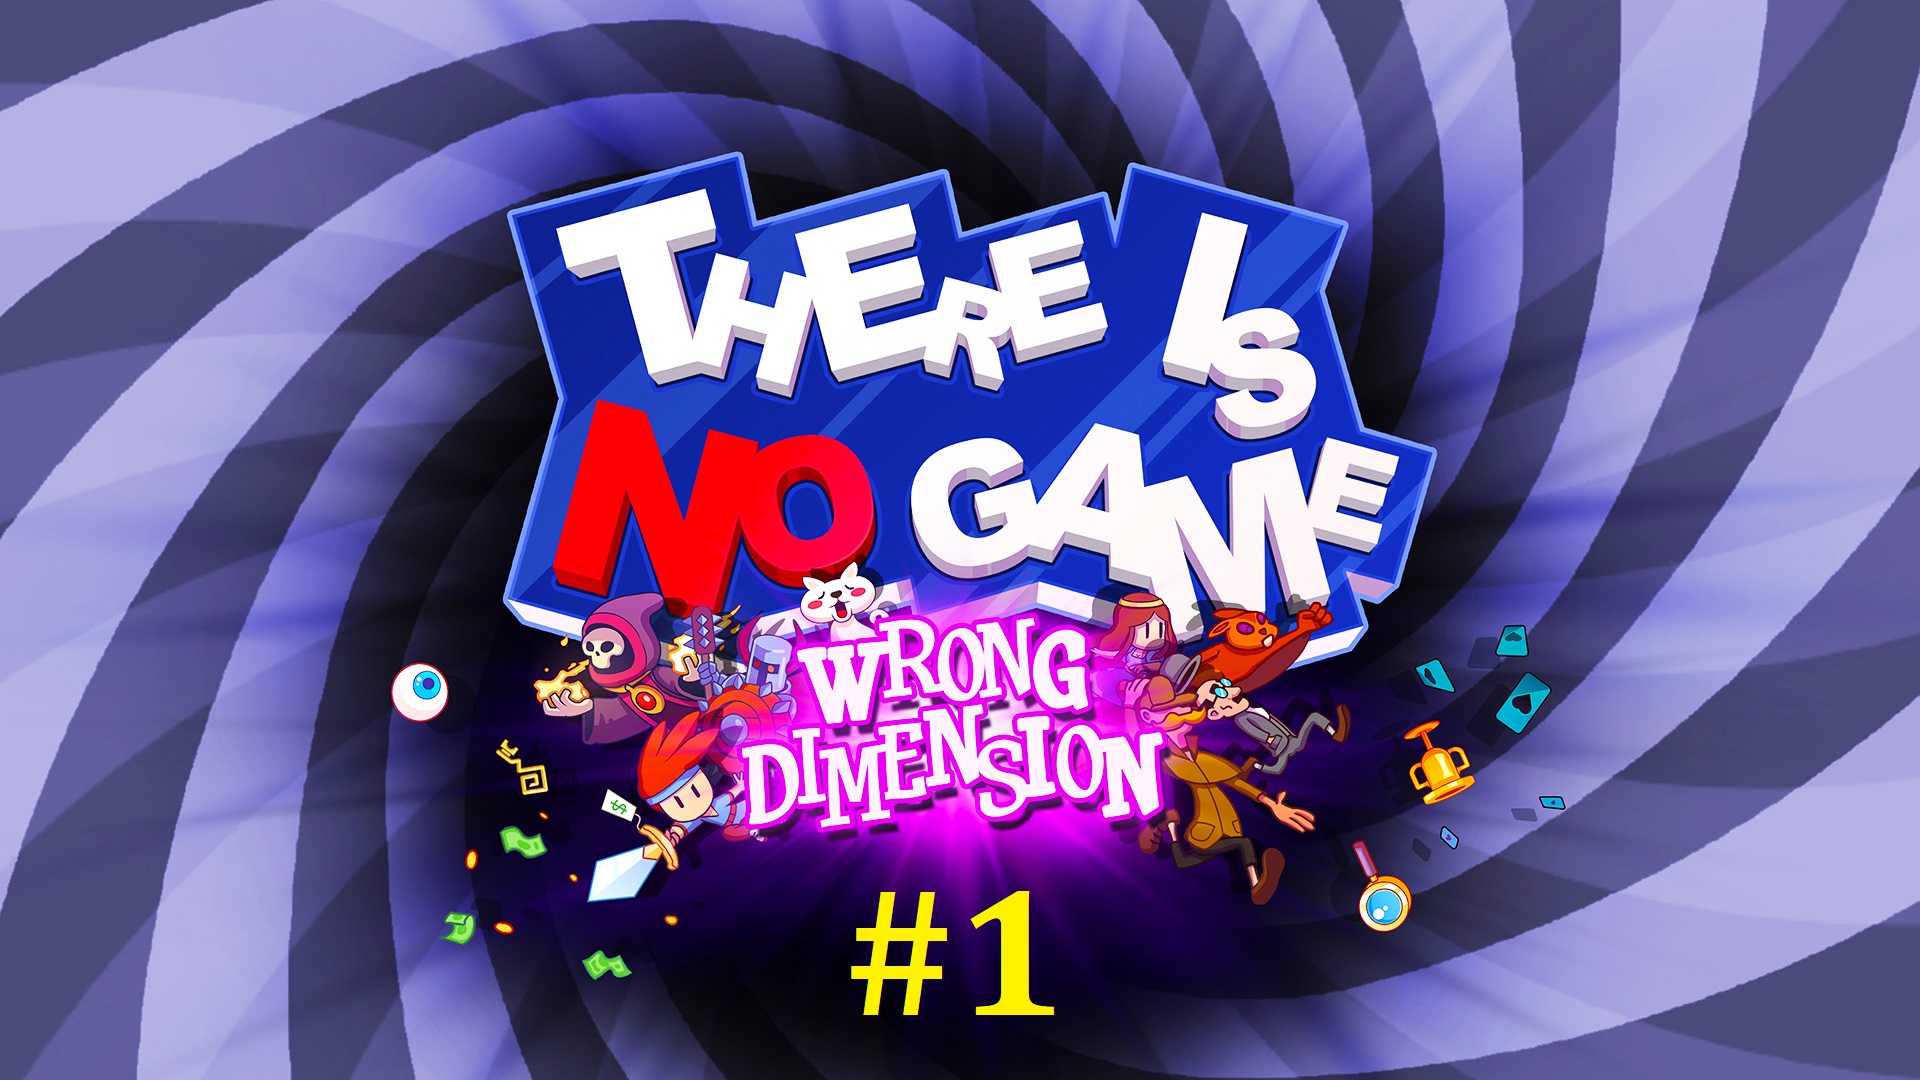 There is no game: wrong Dimension. There is no game - wrong Dimension код. There is no game wrong